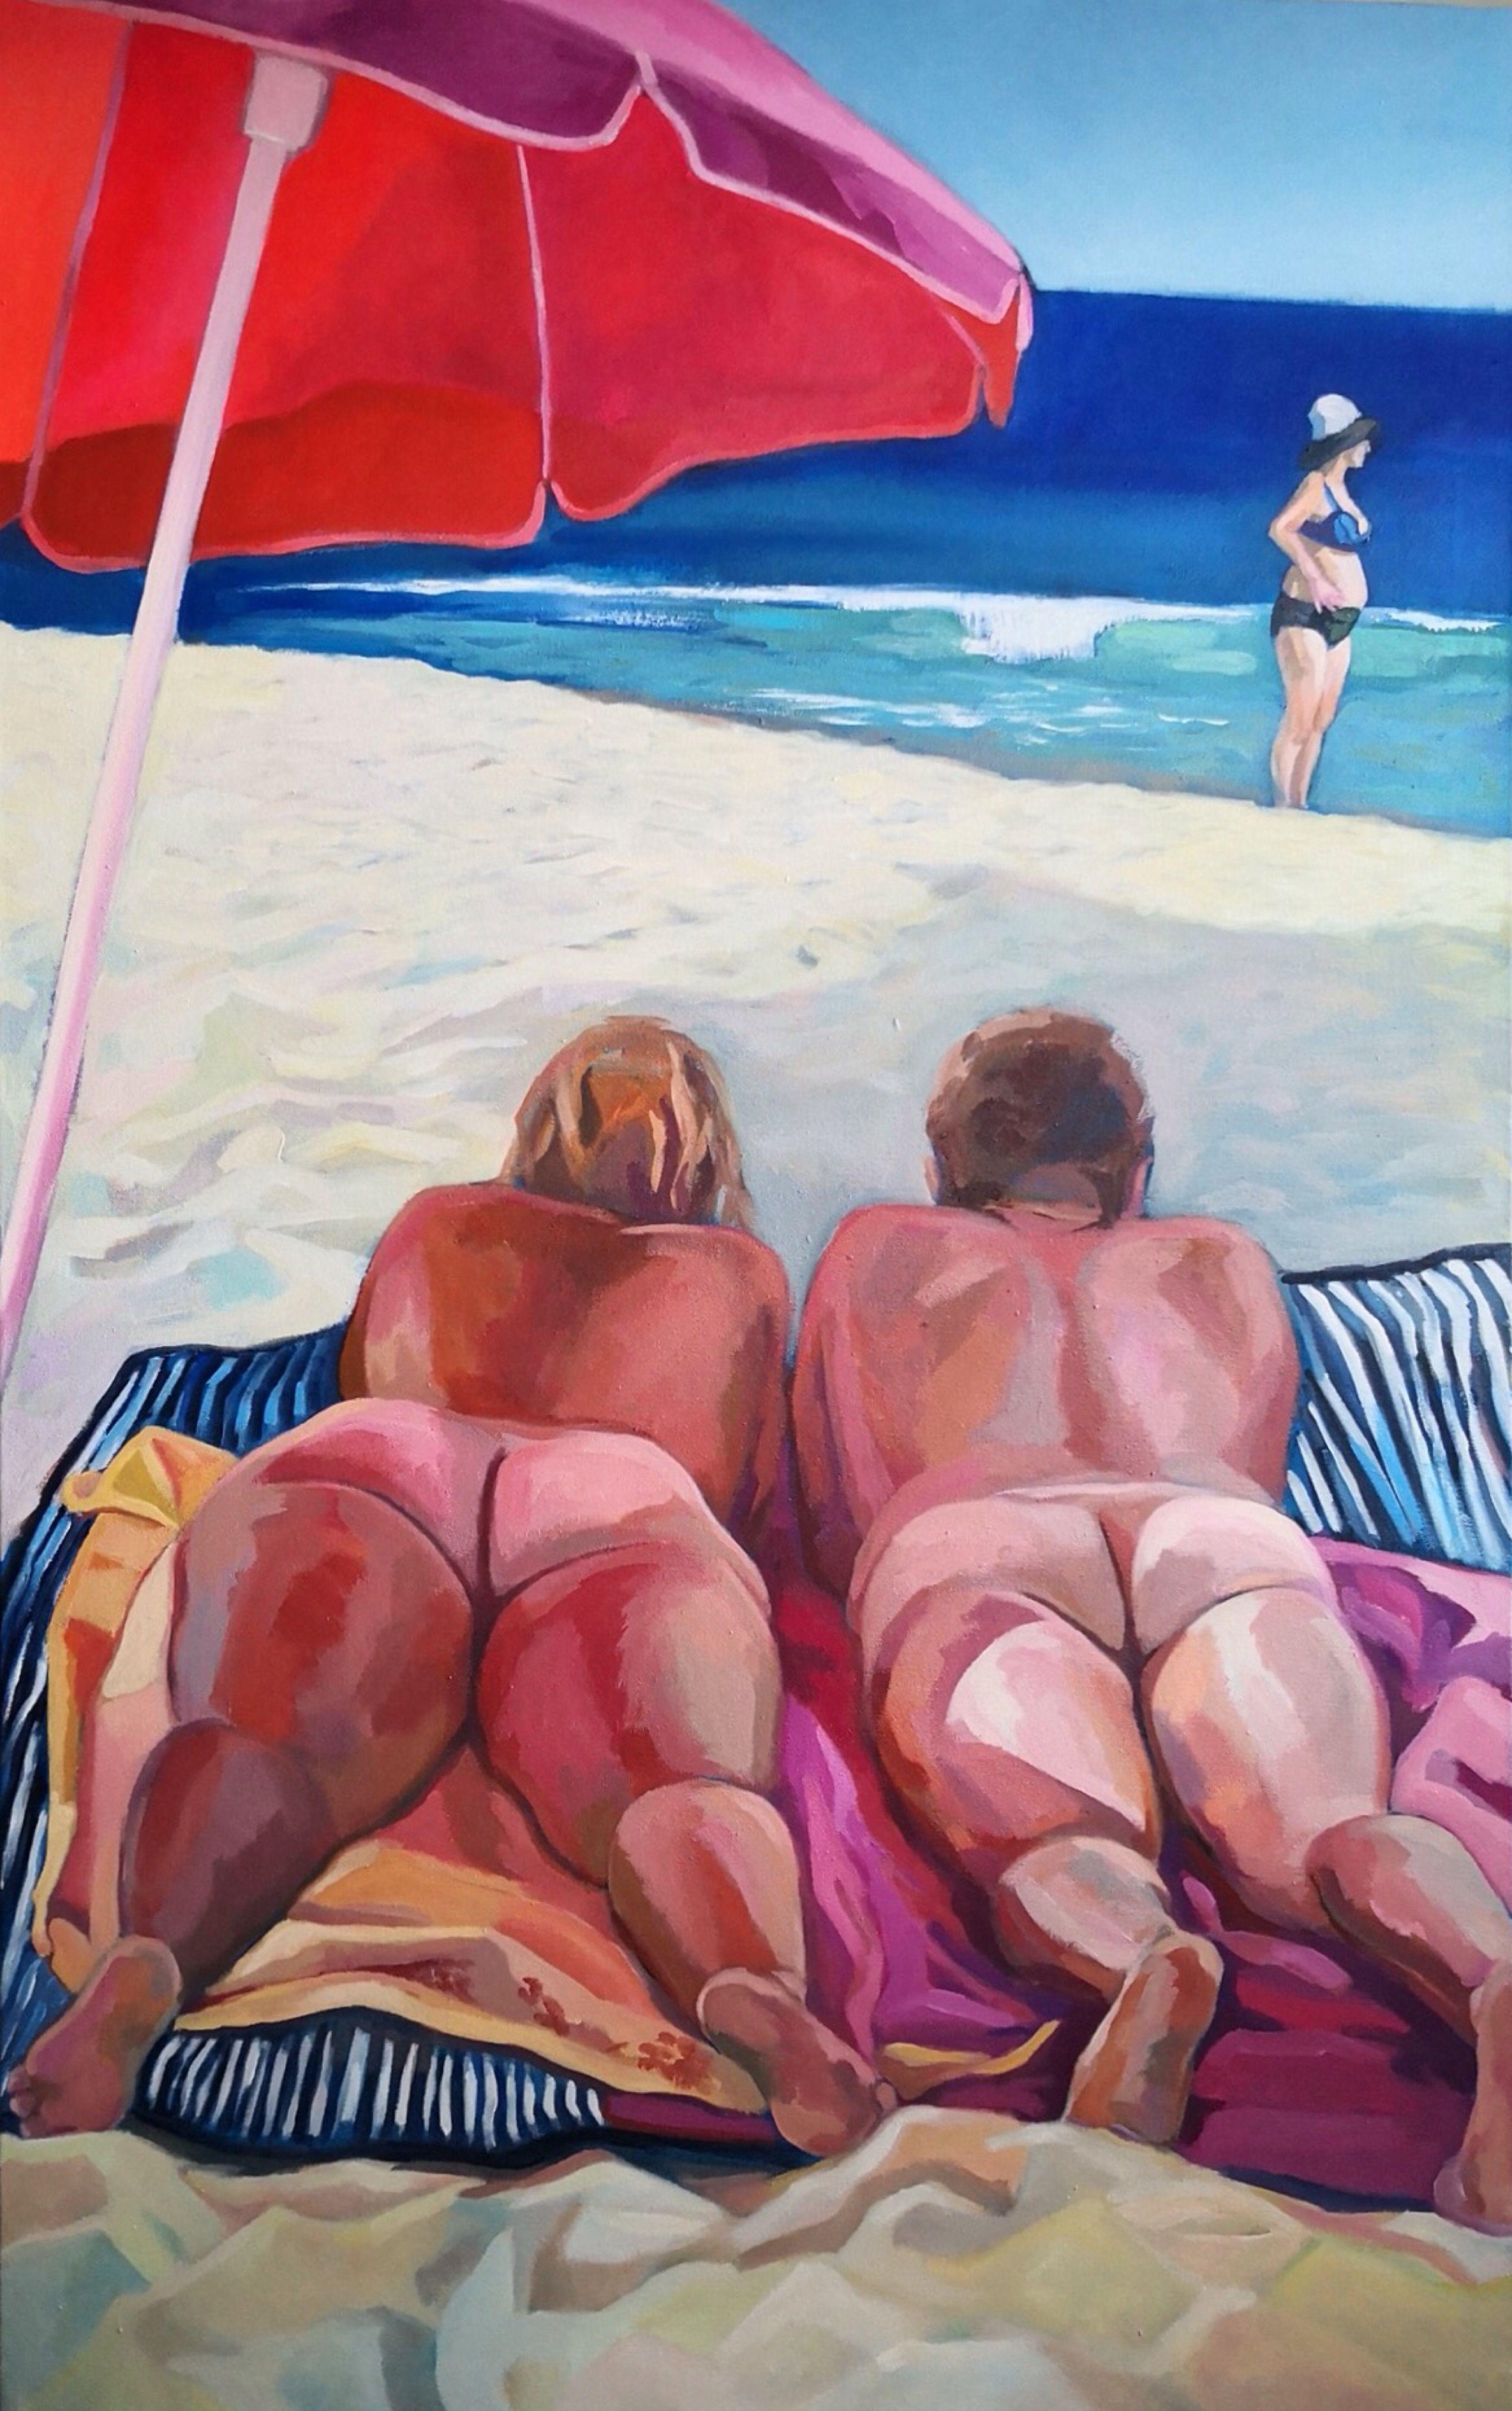 Acrylic on unmounted canvas. Belongs to a series of works on scenes at the beach. Always liked to study gestures and attitudes of people at the beach. :: Painting :: Expressionism :: This piece comes with an official certificate of authenticity